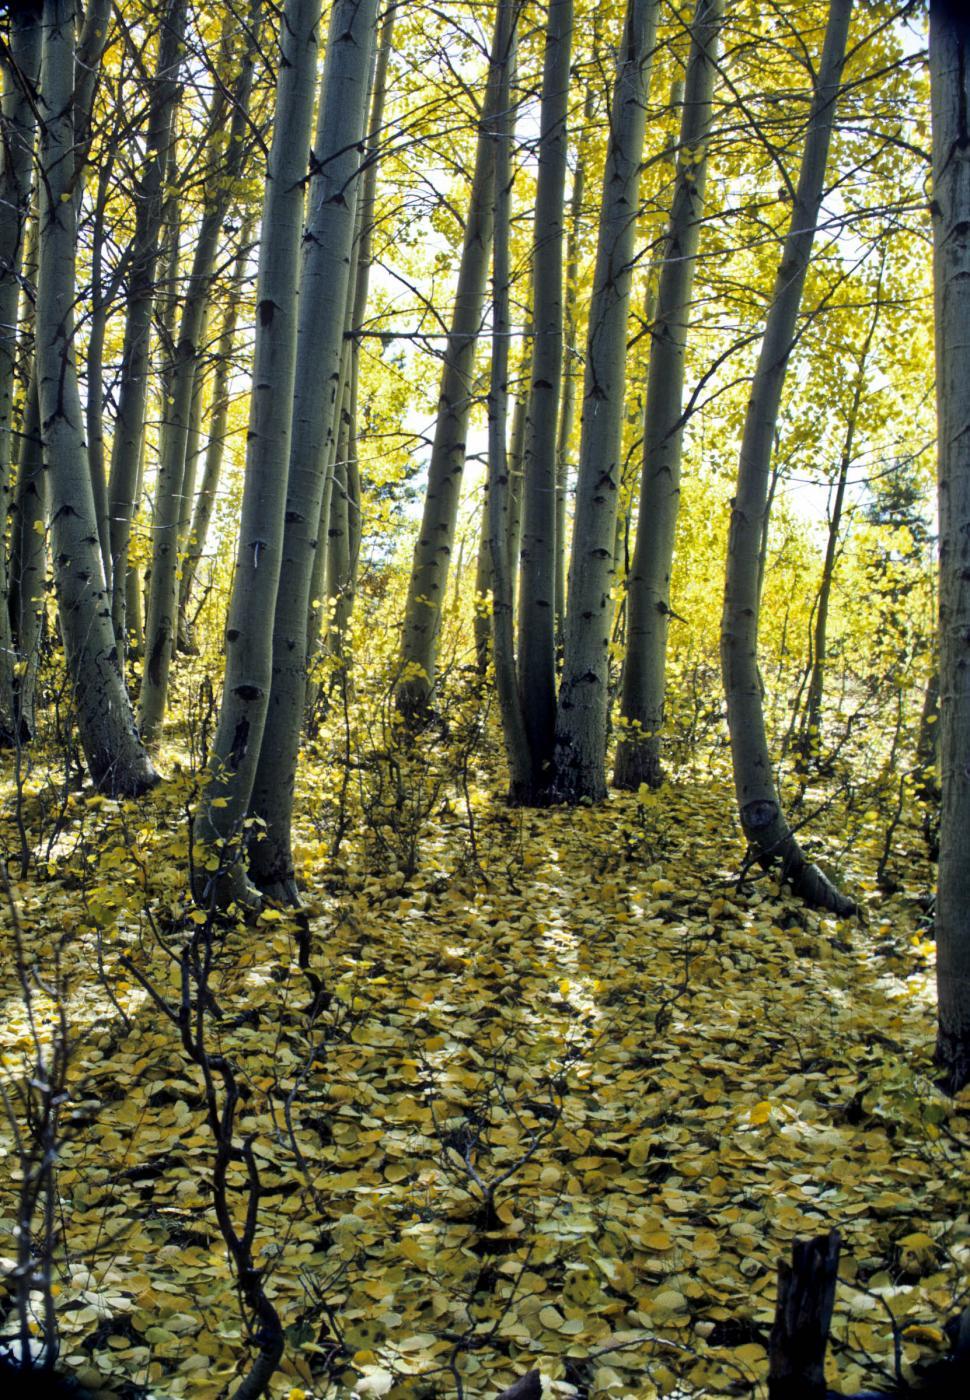 Free Image of aspen forest with fallen leaves 